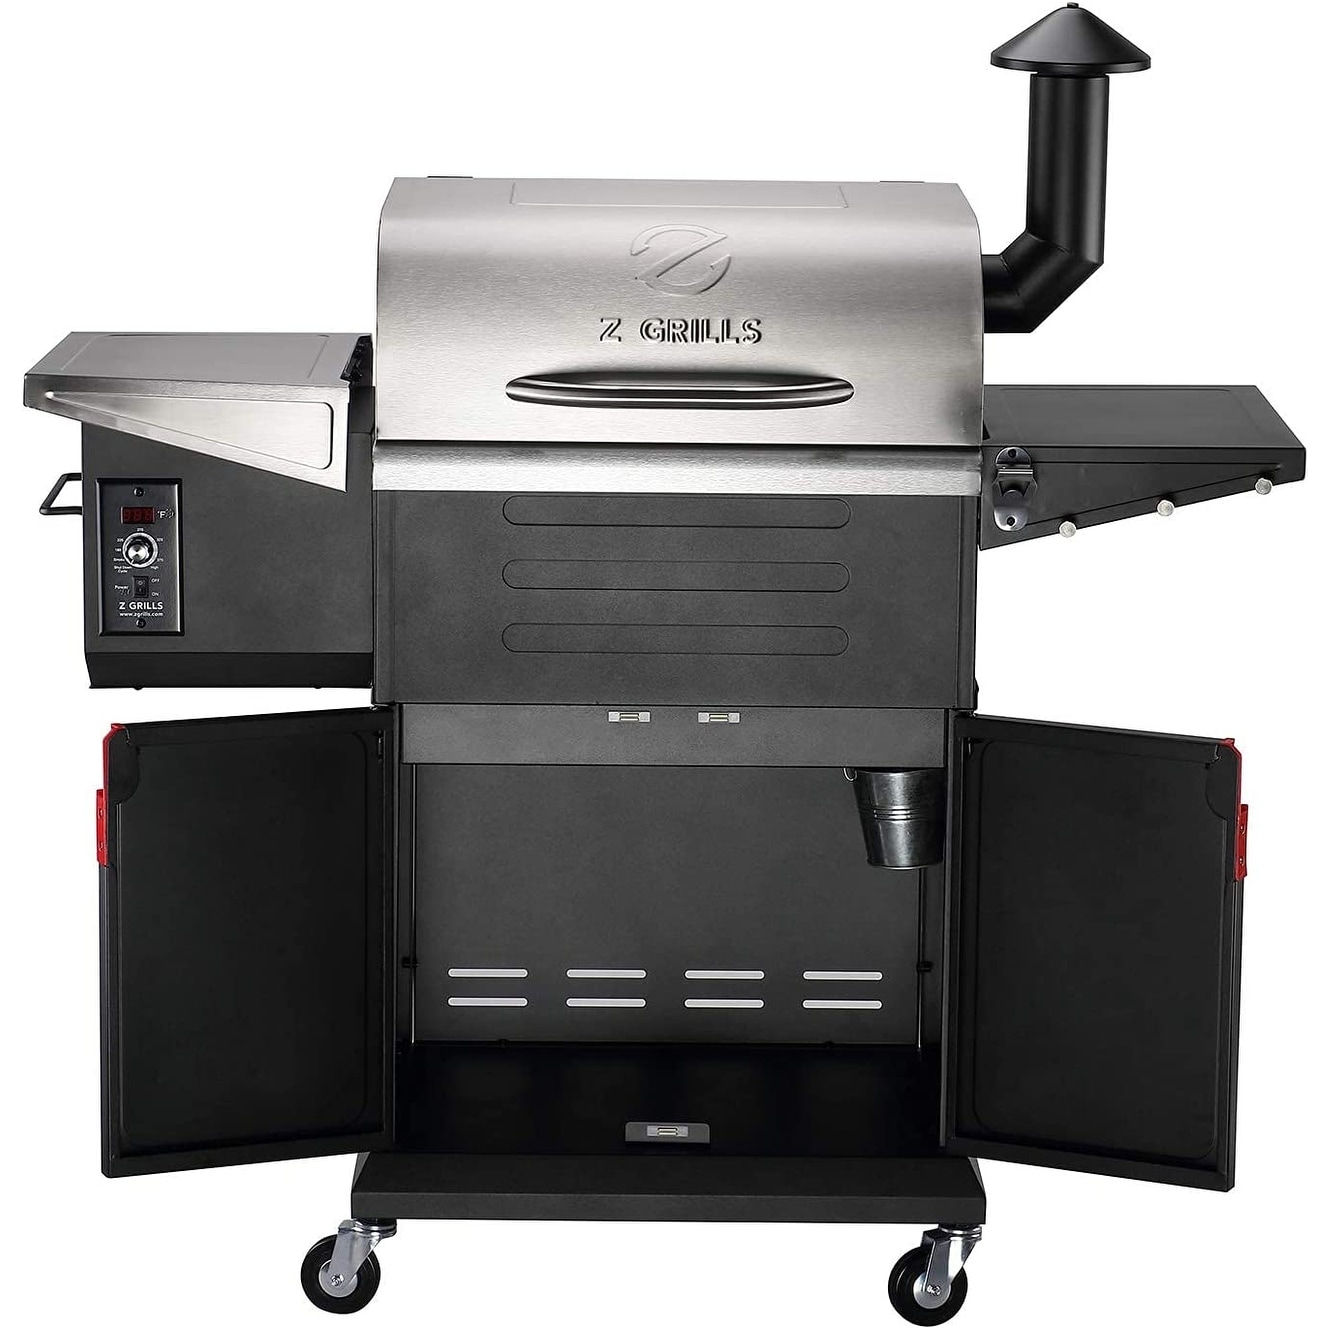 Z GRILLS Grill & Smoker 8 in 1 Grill Wood Pellet Grill & Electric